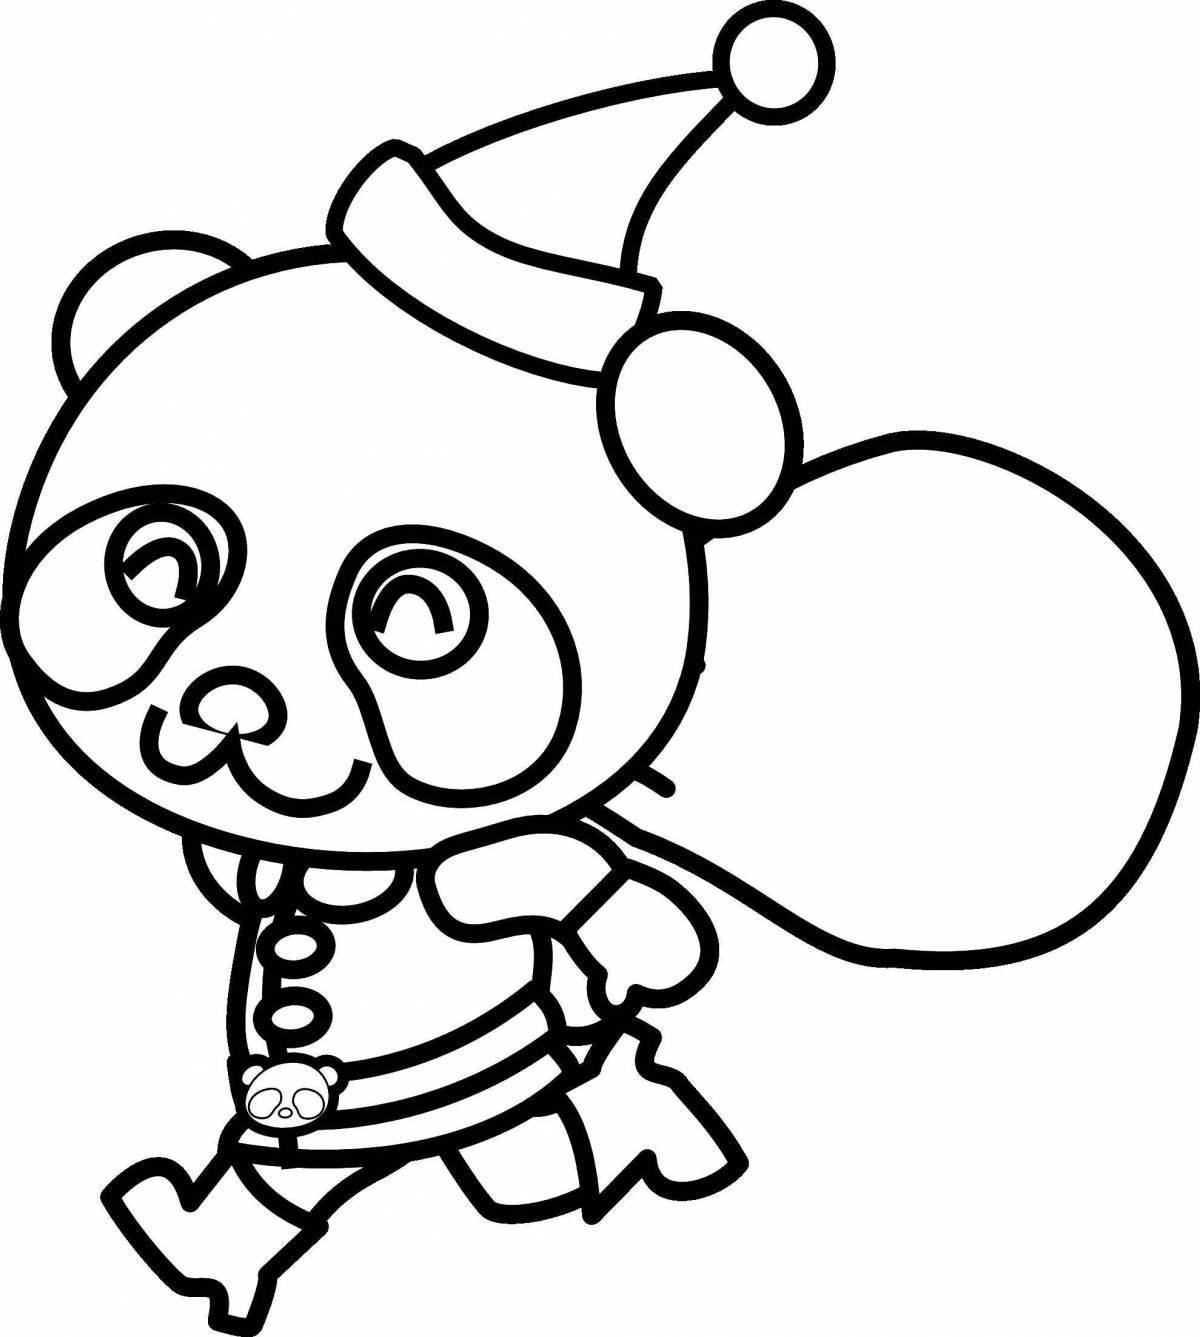 Cute panda coloring pages for kids